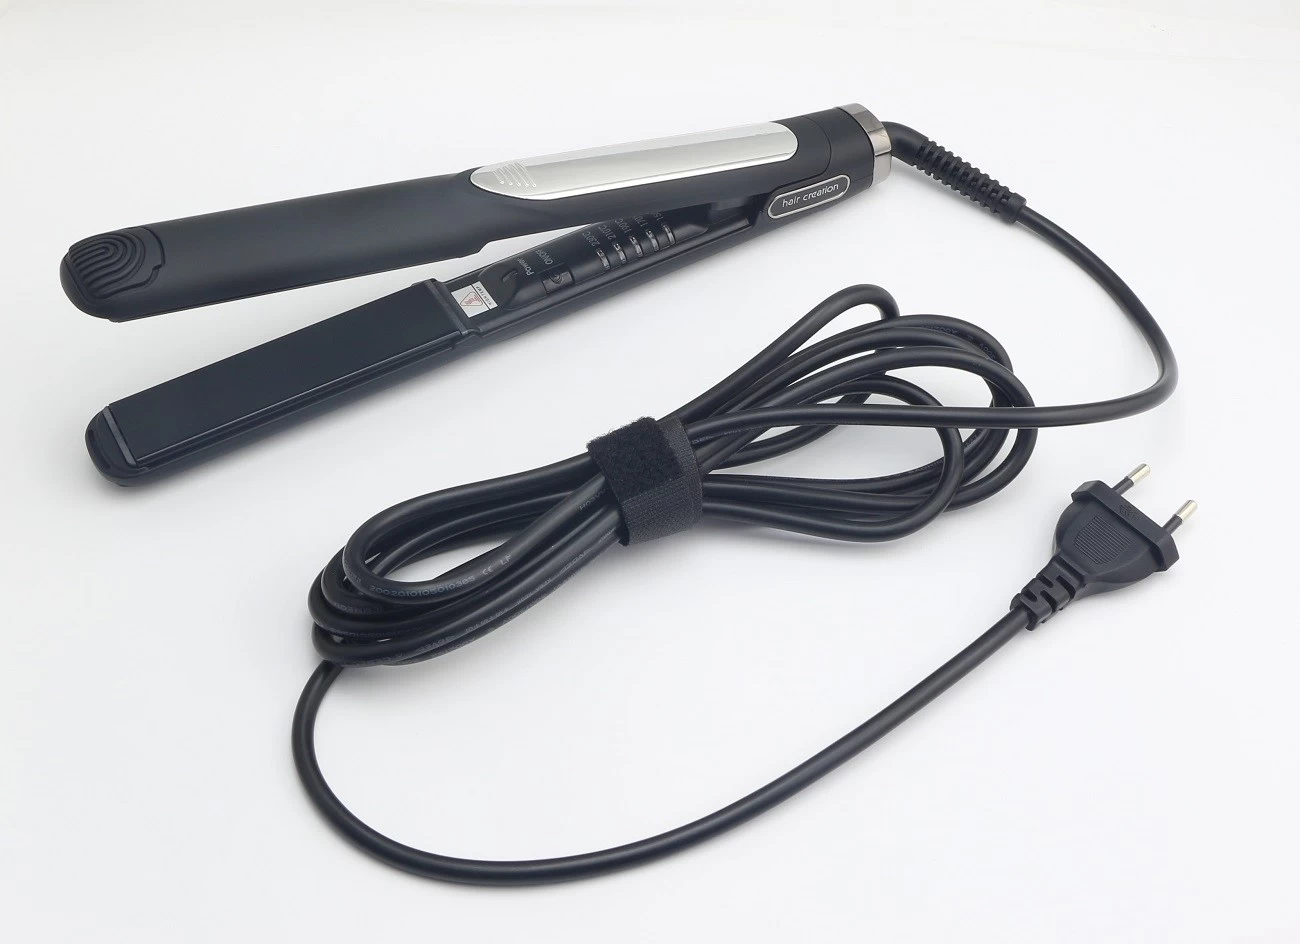 High temperature 480F 240C high quality salon use professional hair flat iron for keratin treatment fast heating up and heat recovery nano ceramic heating plates